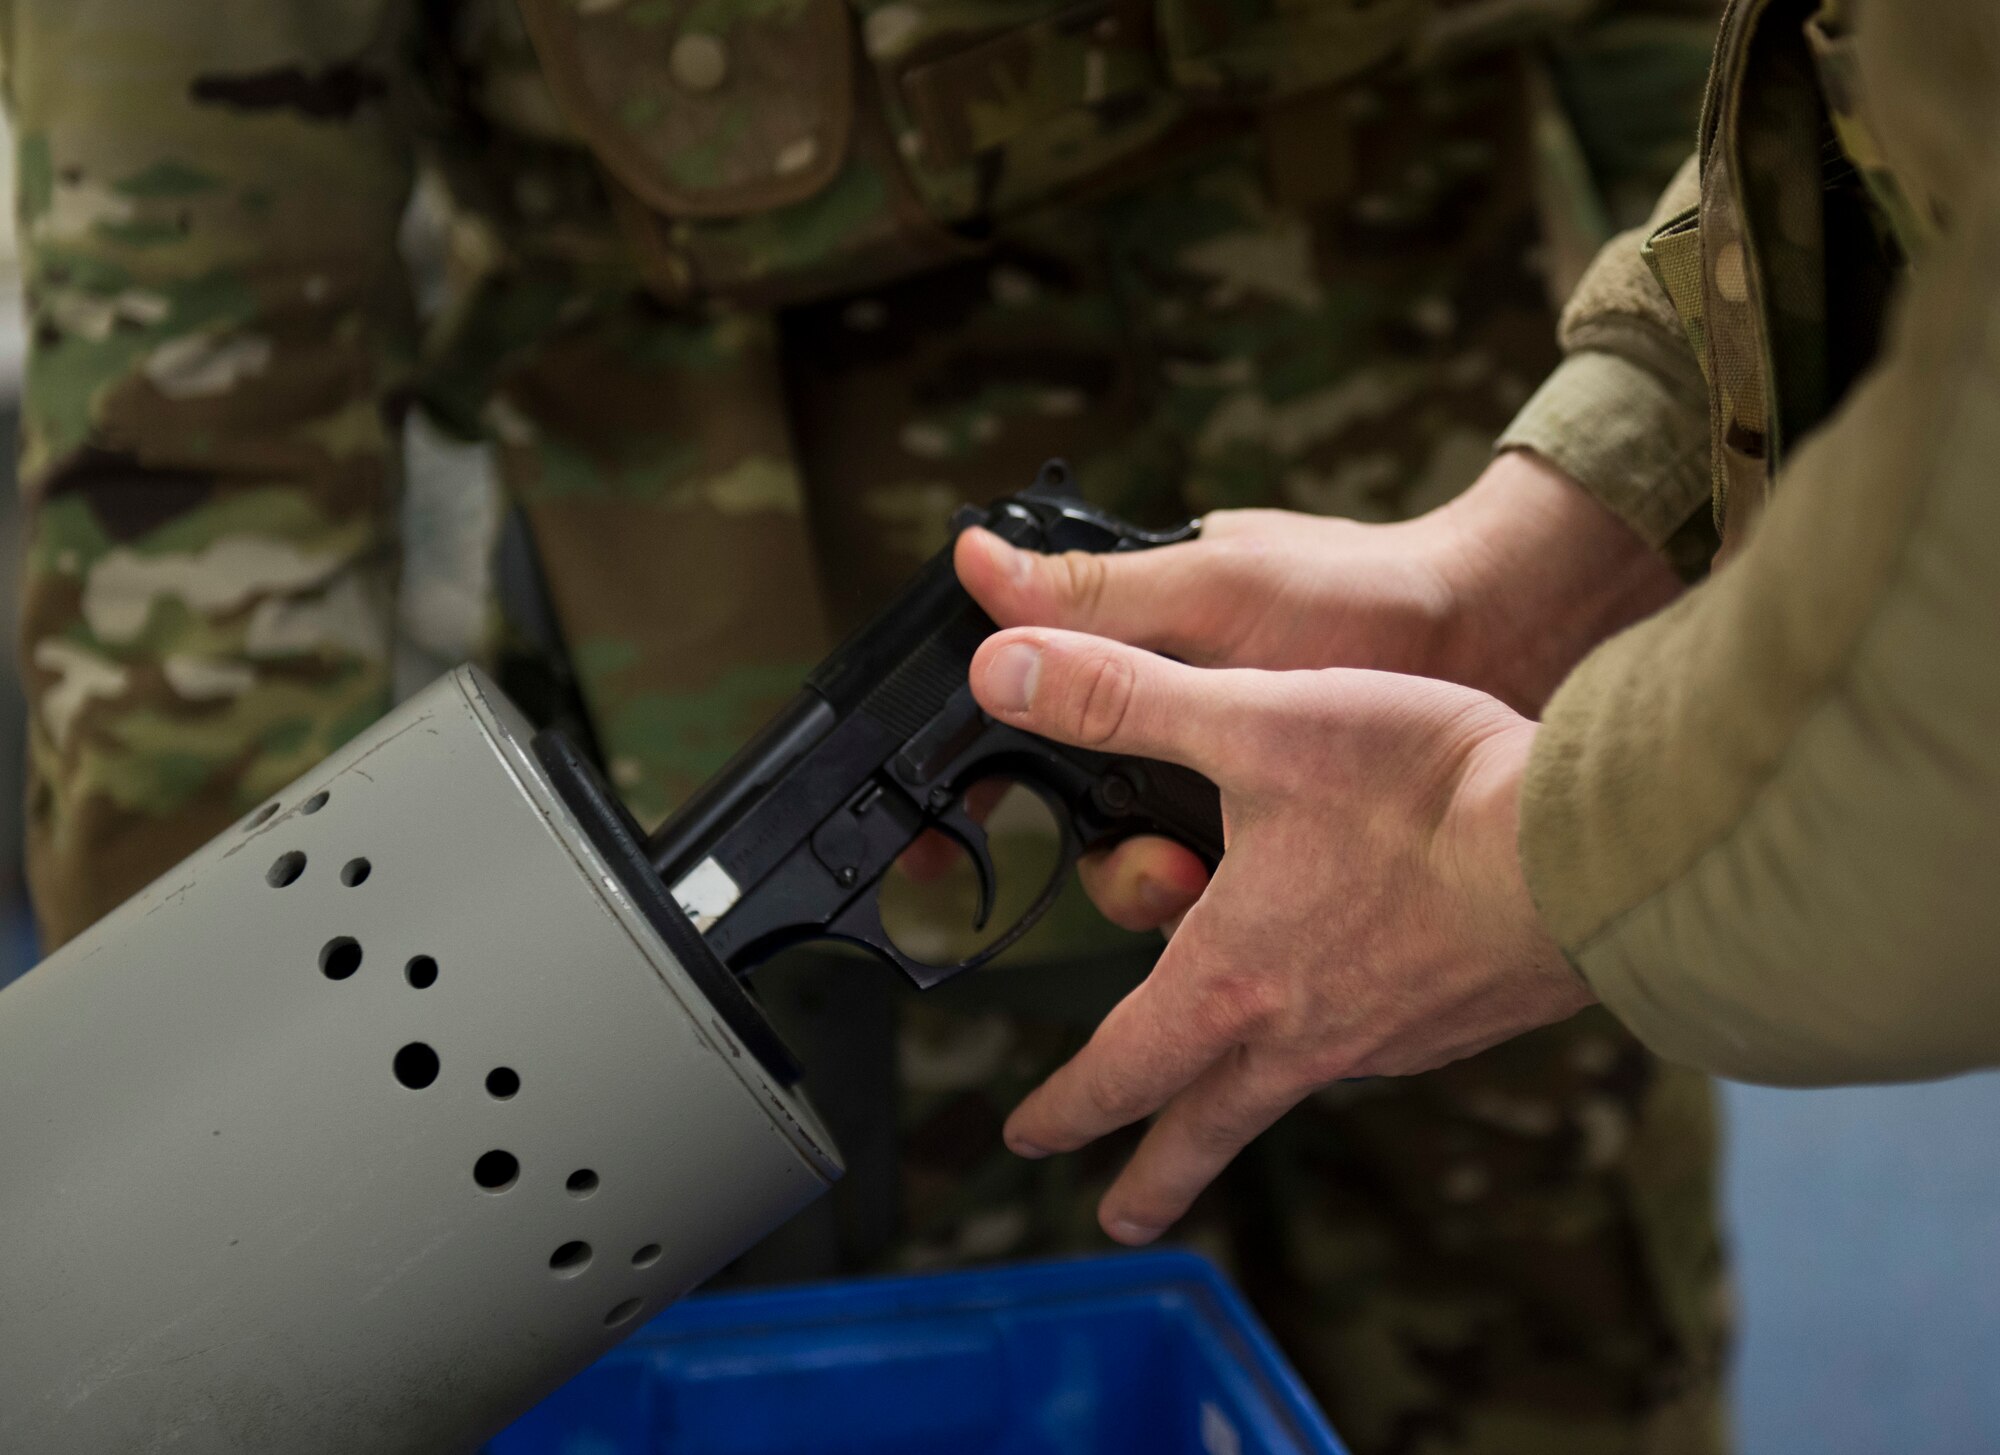 A U.S. Air Force 422nd Security Forces Squadron member clears an M9 pistol during a recall exercise at RAF Croughton, England, November 21, 2019. Quarterly recall exercises are a form of readiness for defenders to always be prepared to respond at a moment’s notice. (U.S. Air Force photo by Airman 1st Class Jennifer Zima)